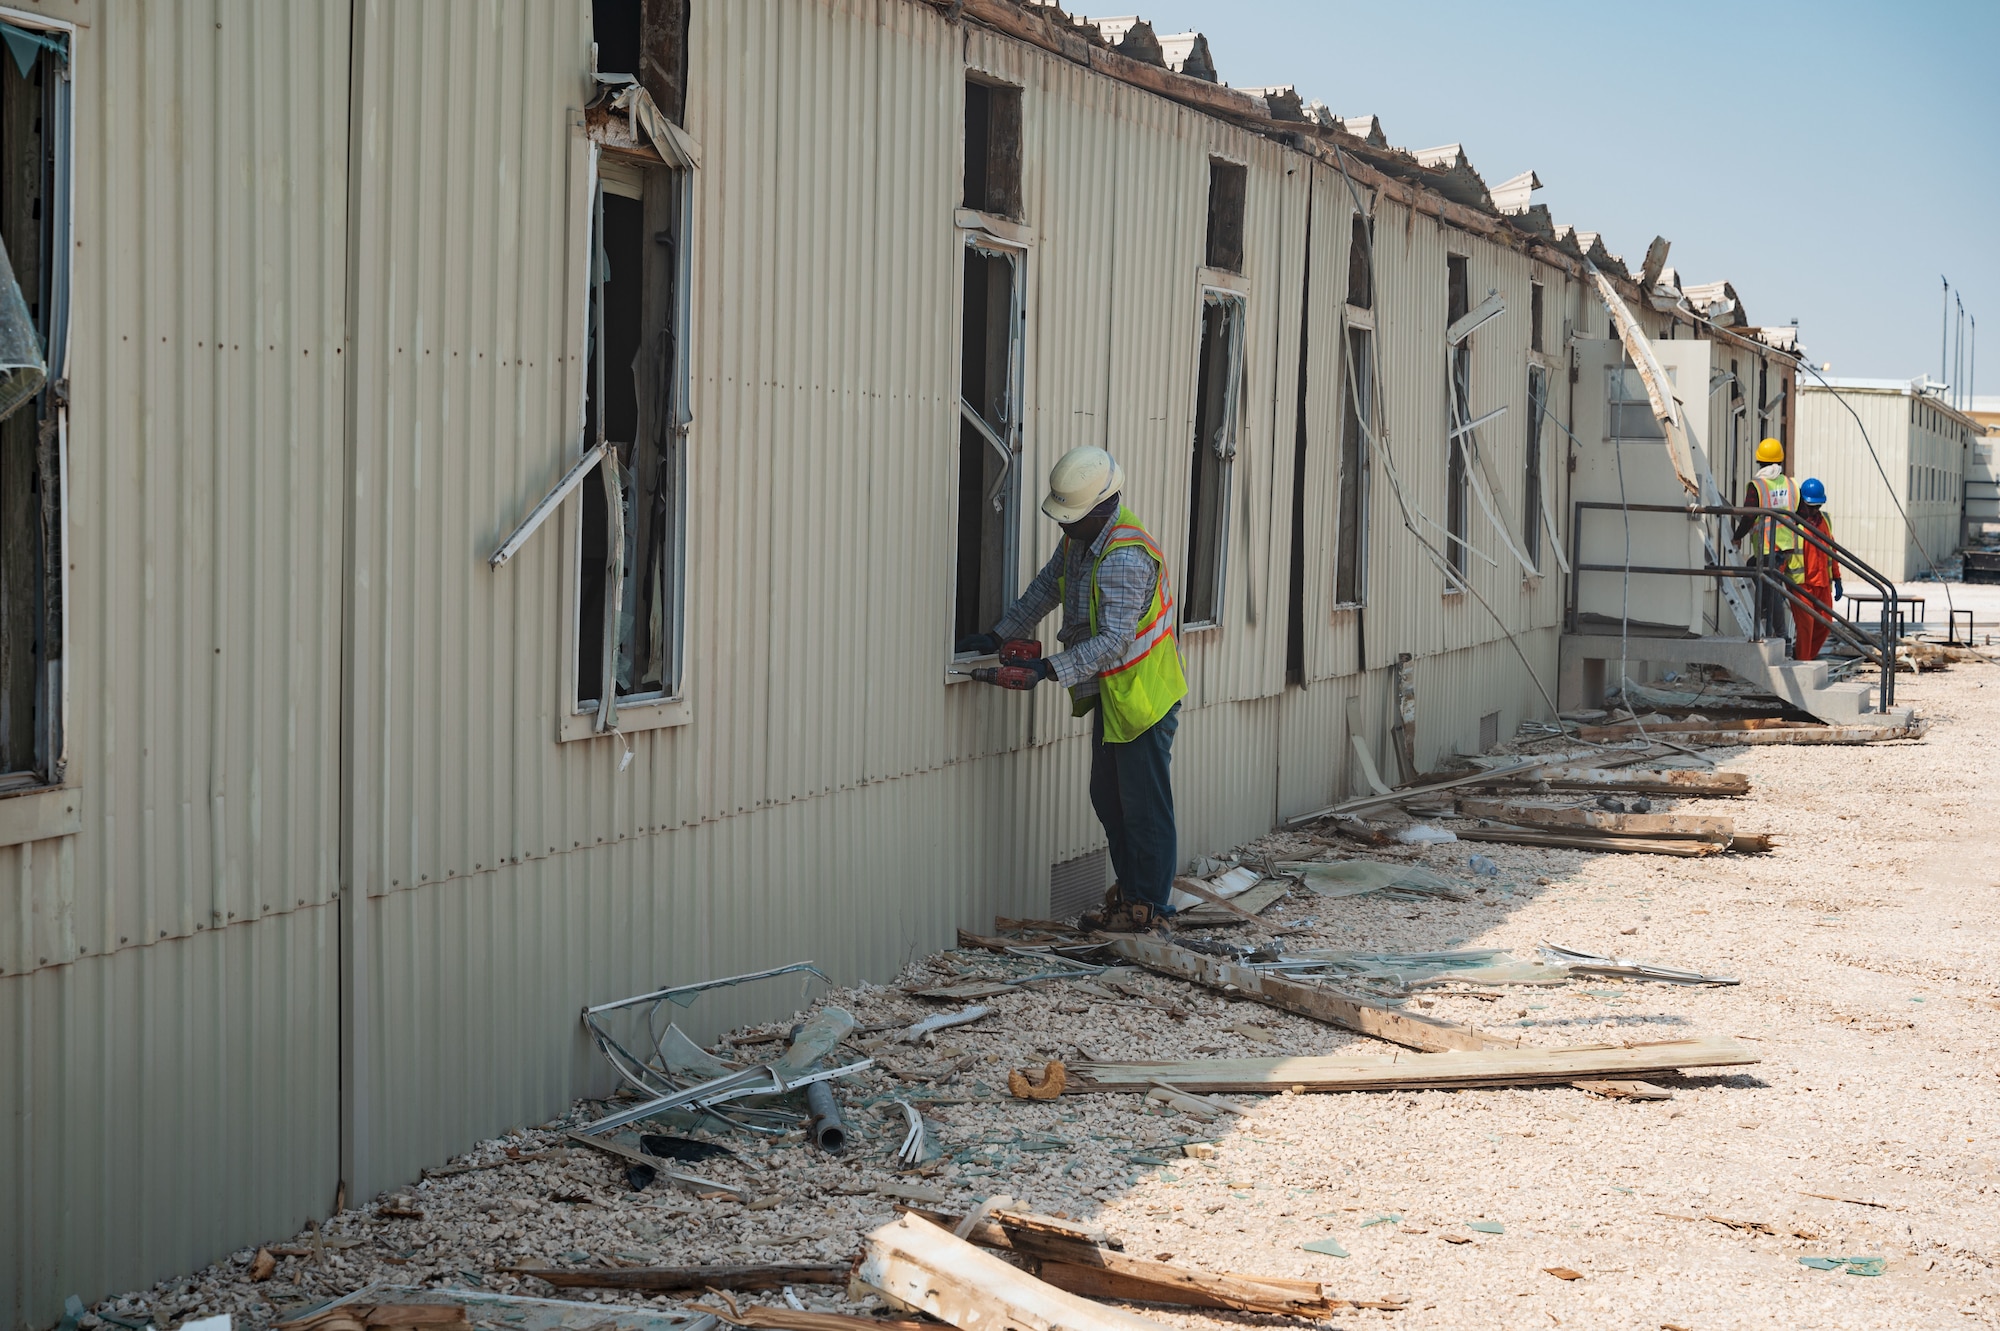 Piece by piece, trailers are demolished to make room for new and lasting facilities at Al Udeid Air Base, Qatar, Aug. 22, 2022. The newly available space will allow for a new Coalition Compound gym facility as well as other renovations. (U.S. Air Force photo by Staff Sgt. Dana Tourtellotte)